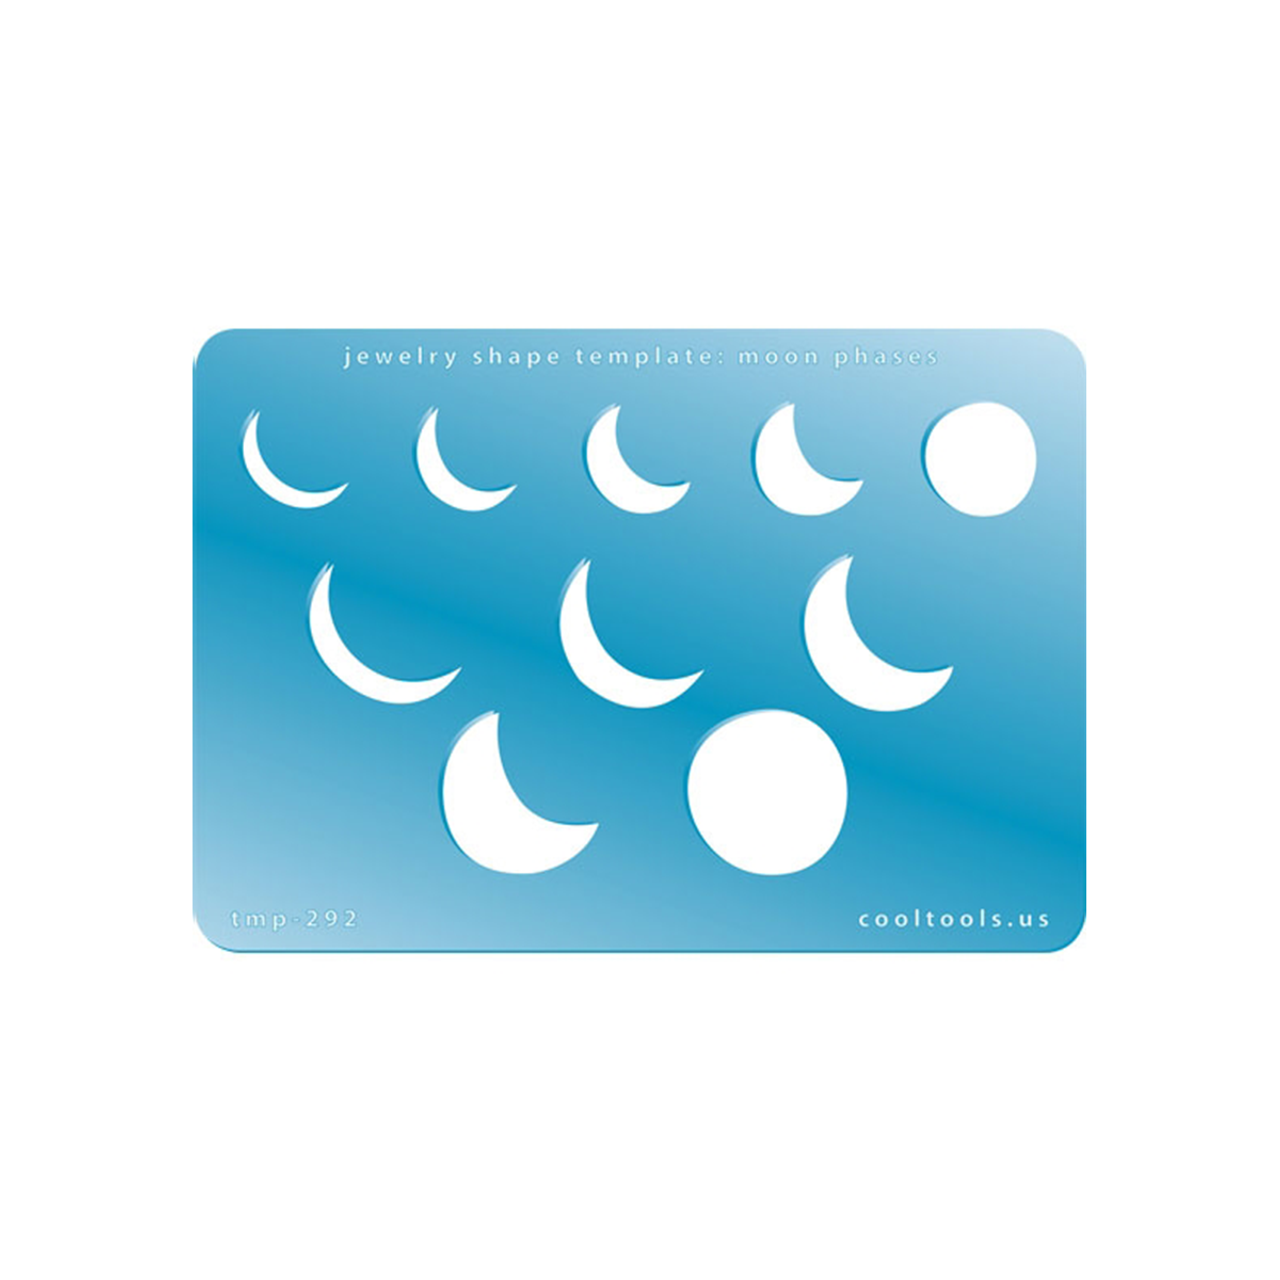 Moon Phases template by Cool Tools.